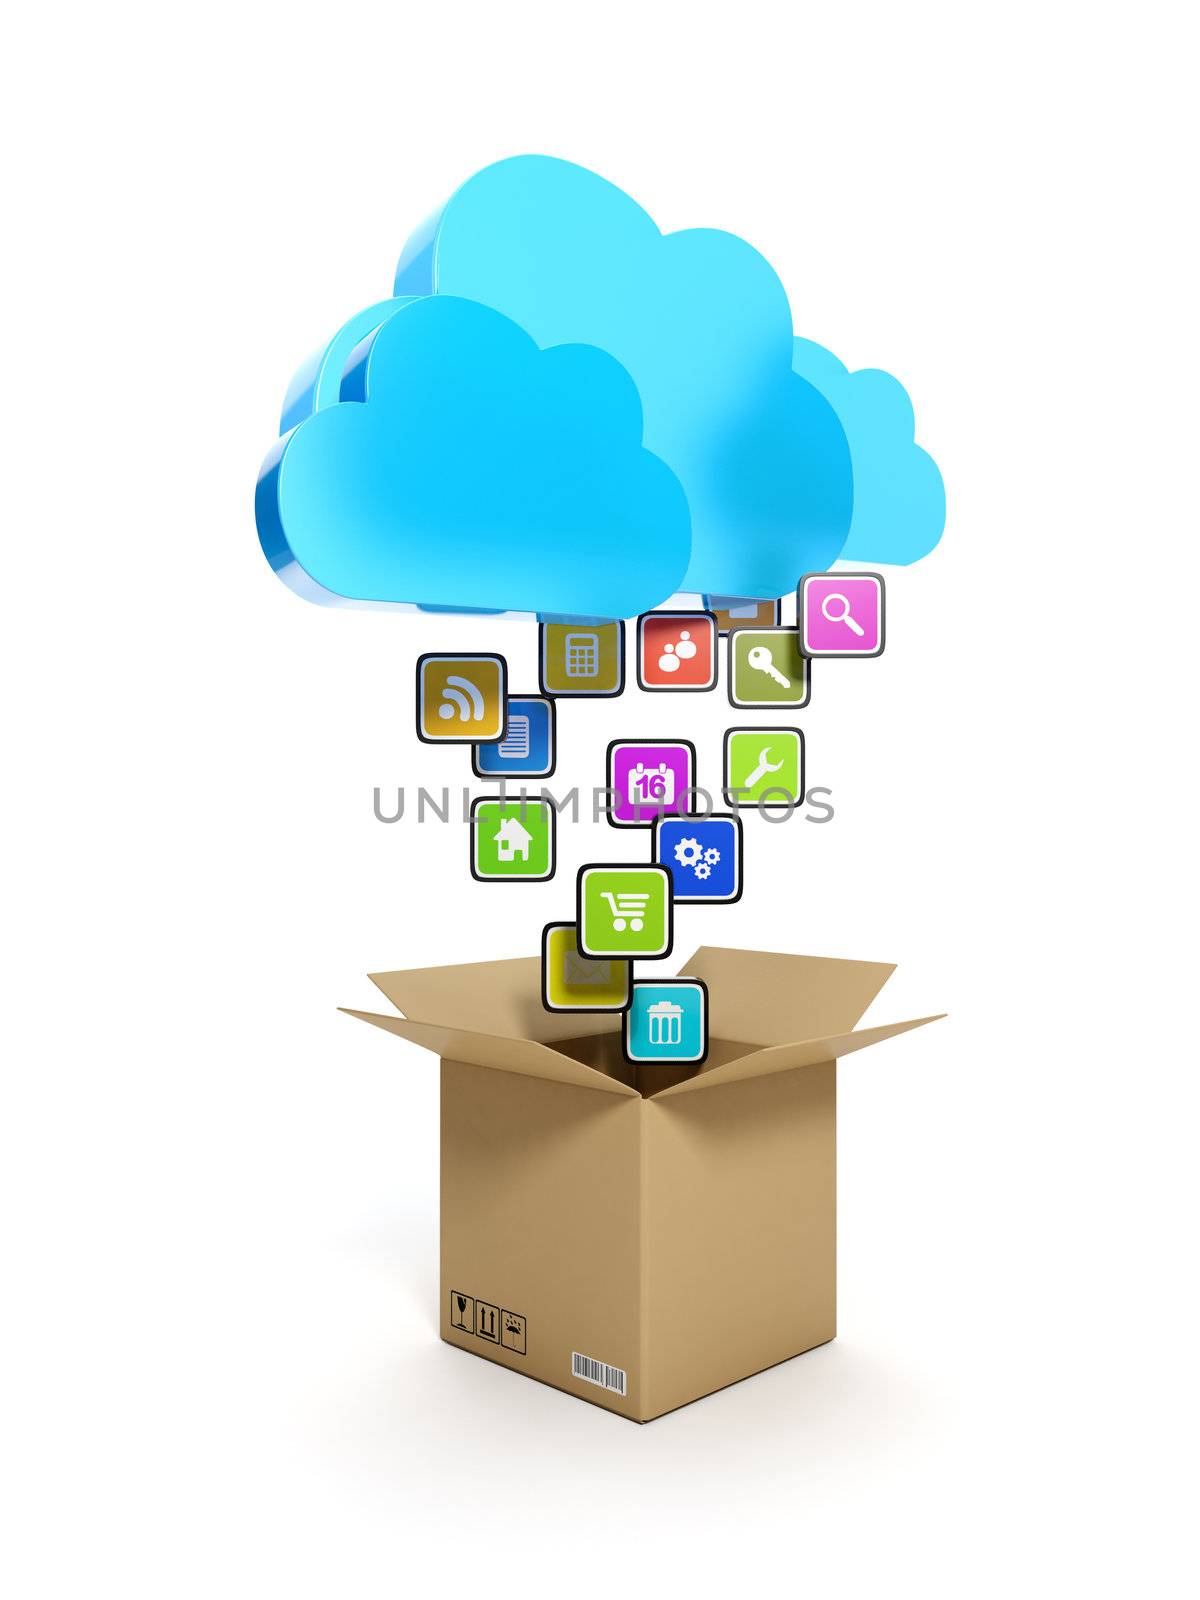 3d illustration: Downloading mobile icons. A blue cloud and a box with icons on a white background